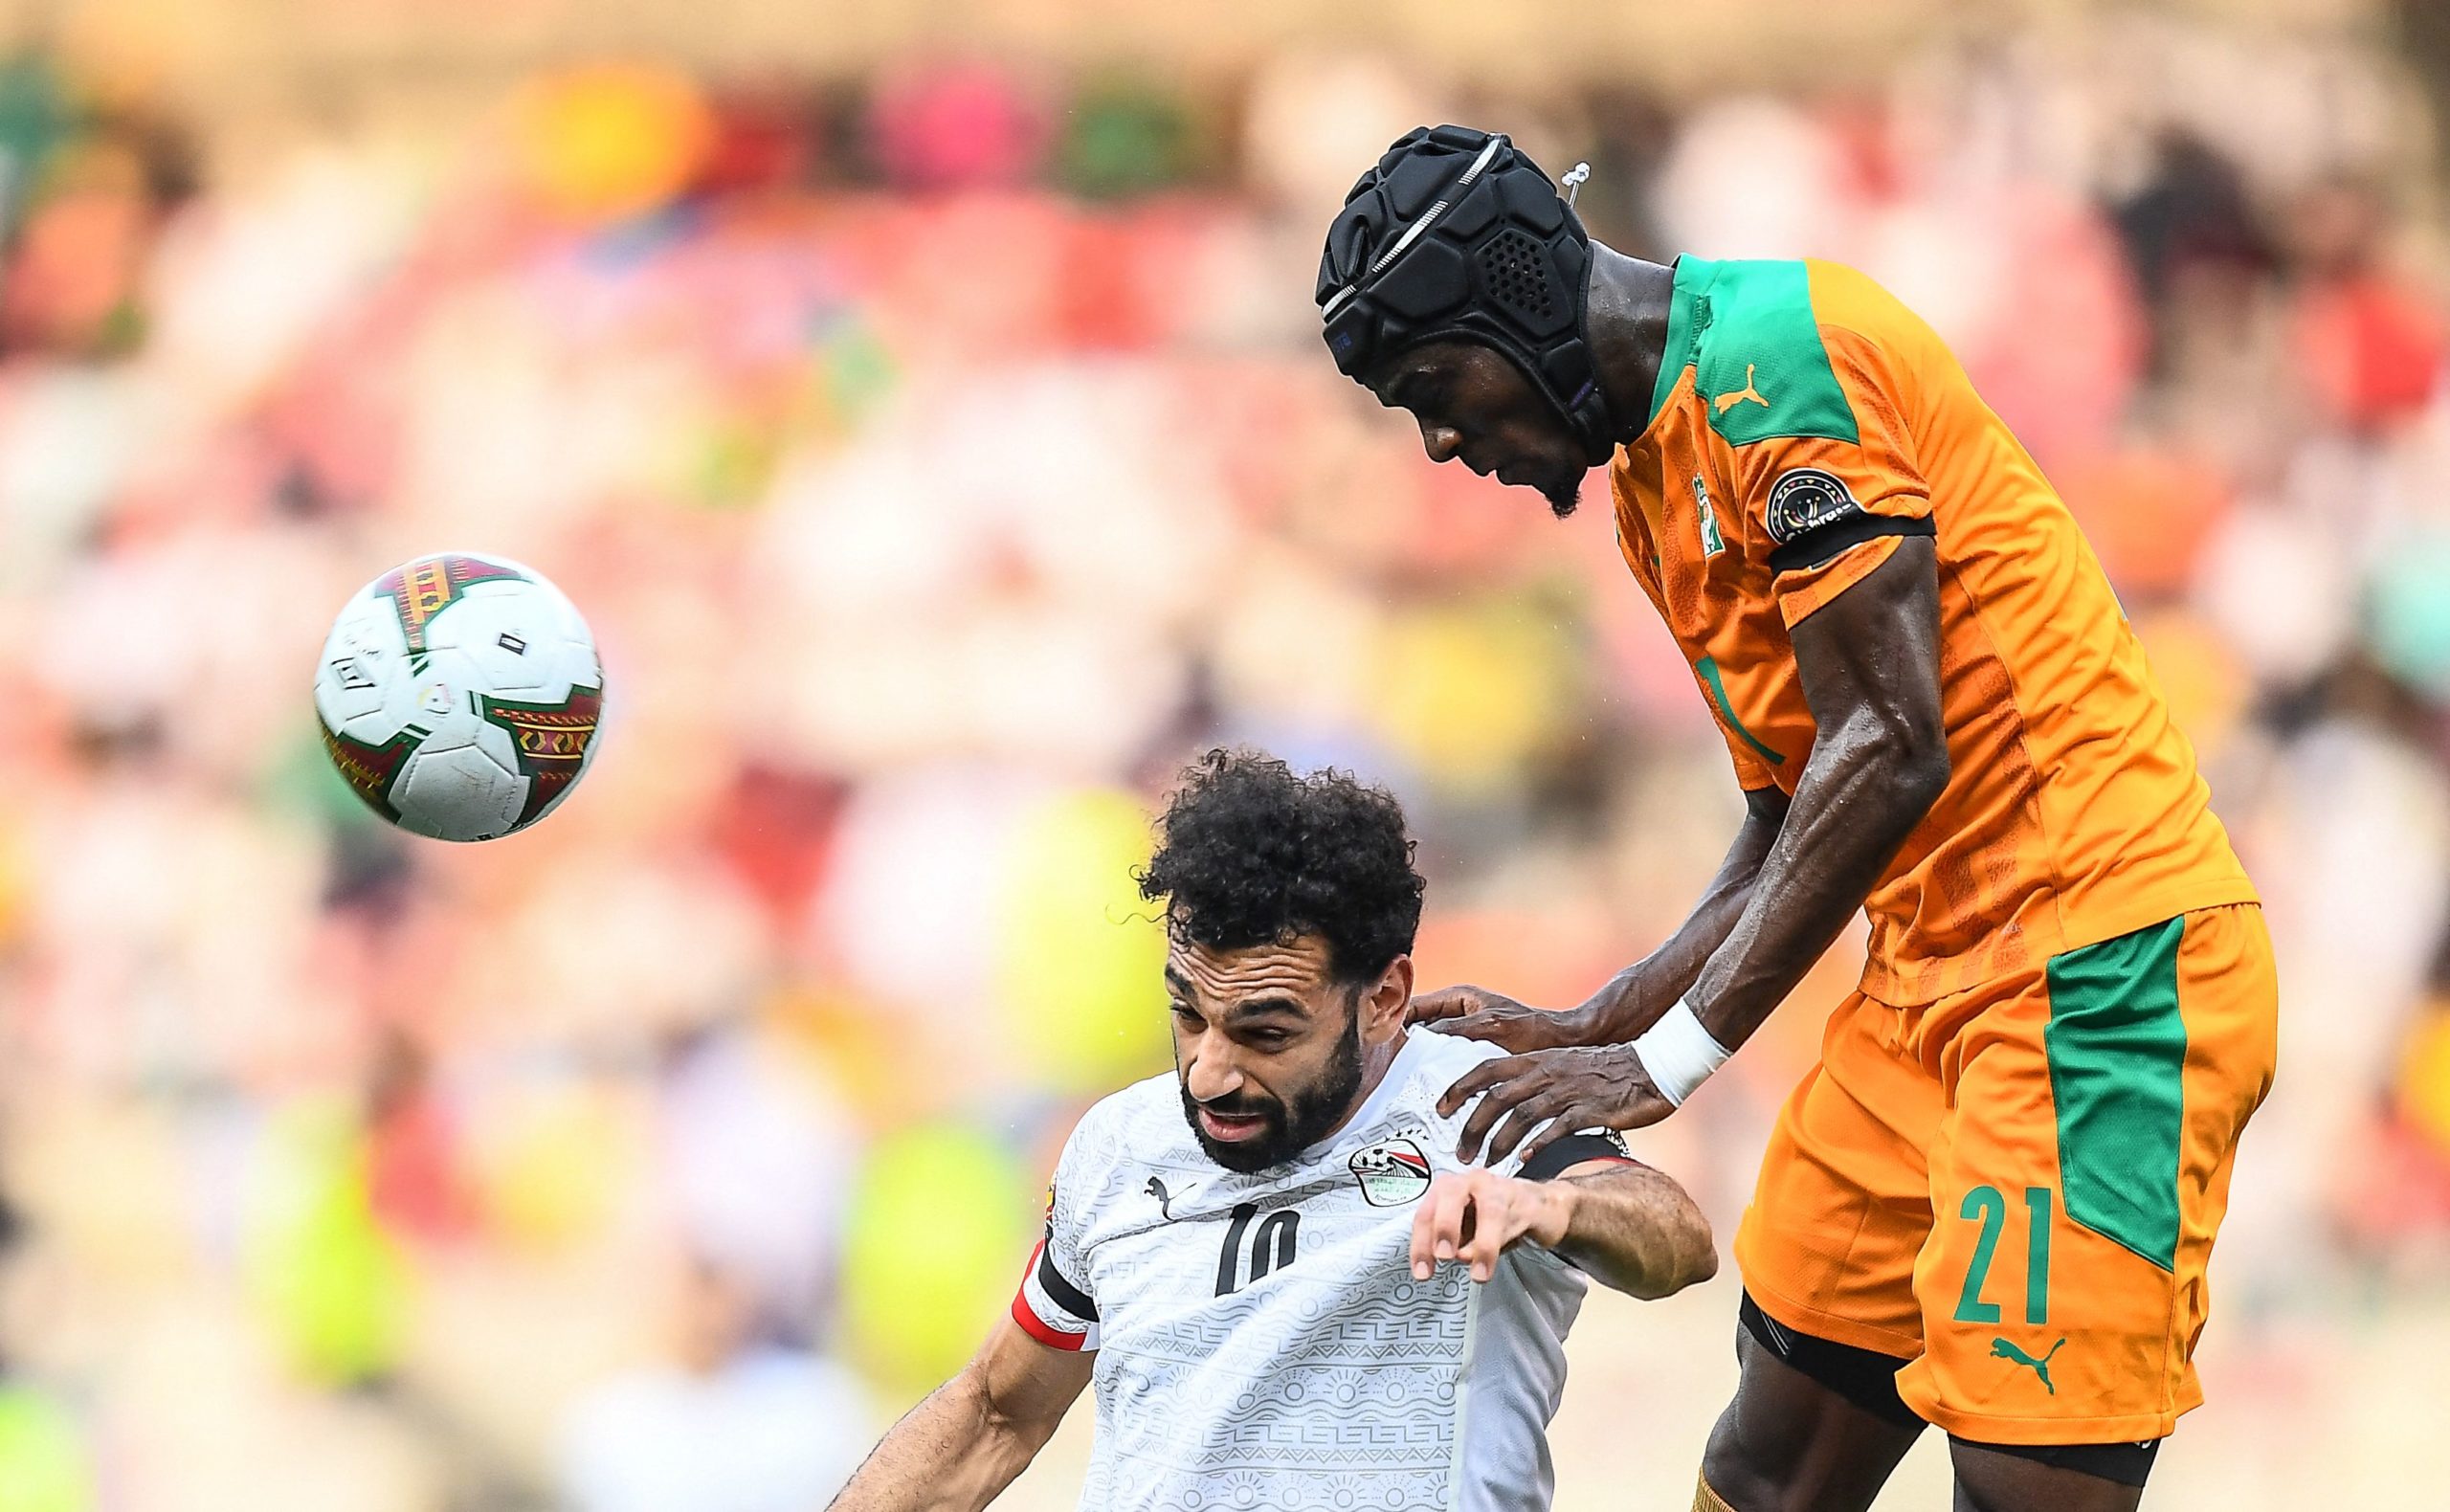 Eric Bailly earns rave reviews after Ivory Coast performance before missing crucial penalty